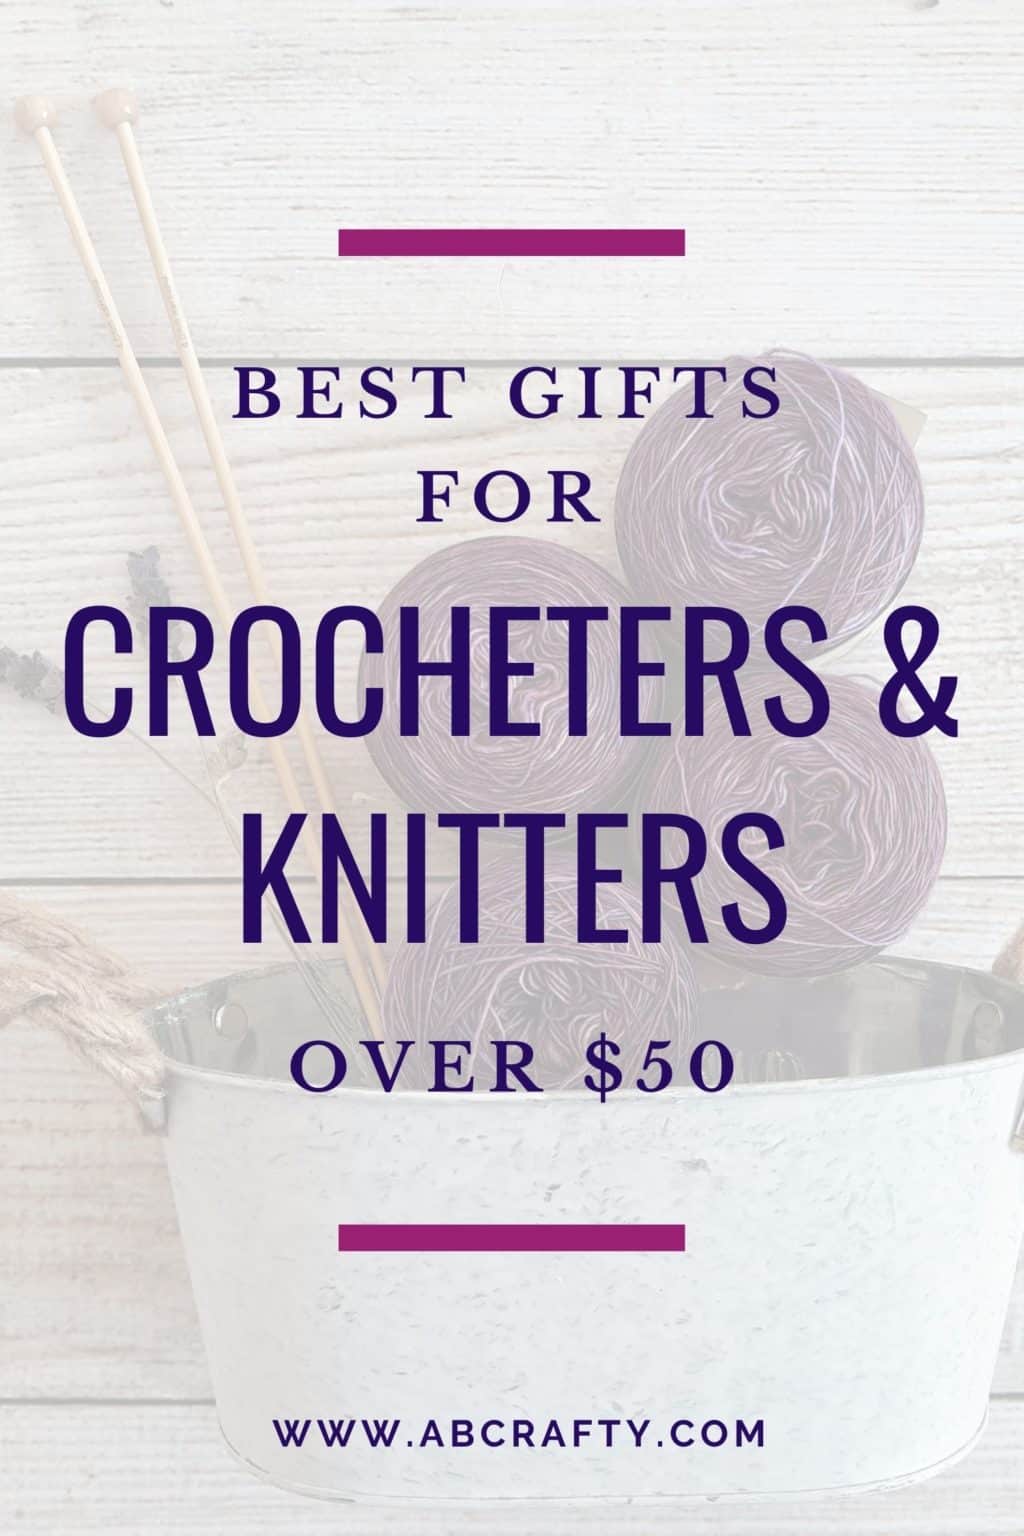 26 Knitting and Crochet Gifts - Best Gift Ideas for Knitters and